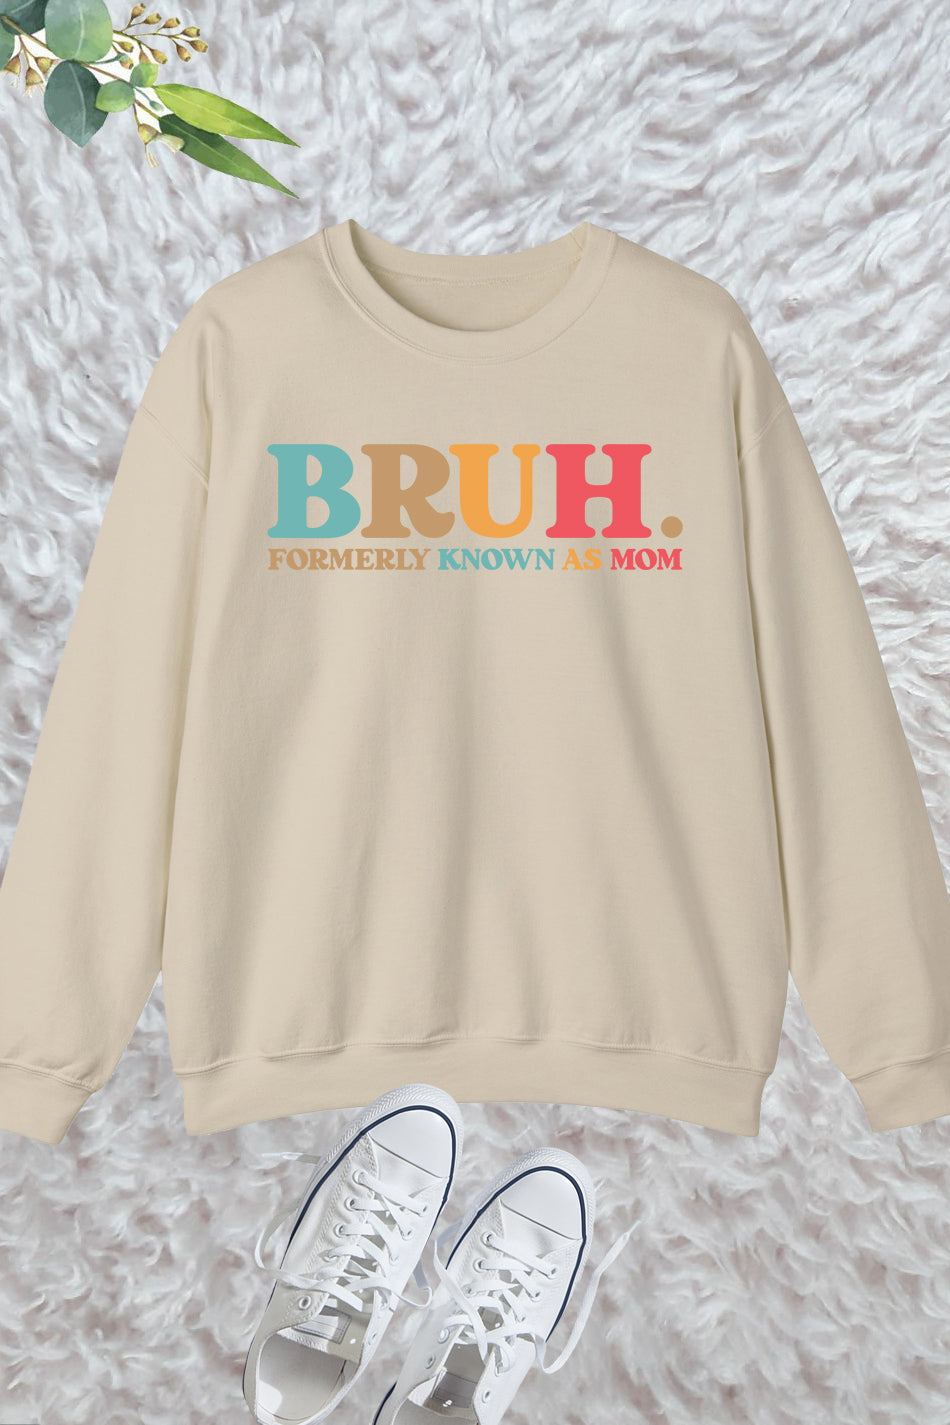 Bruh Formerly known as Mom Sweatshirts